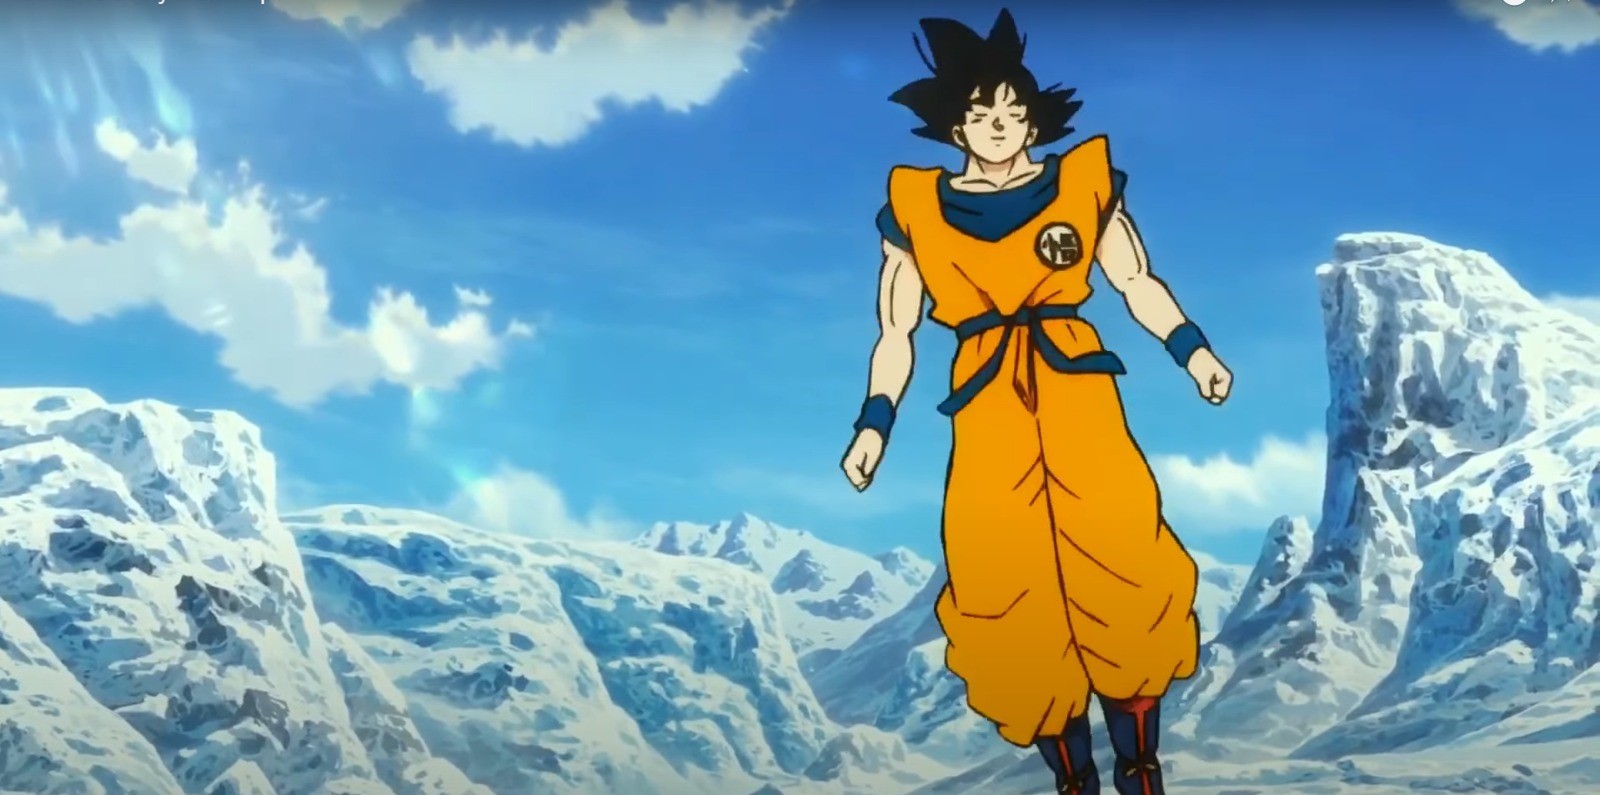 Goku's Iconic Warm up Against Broly